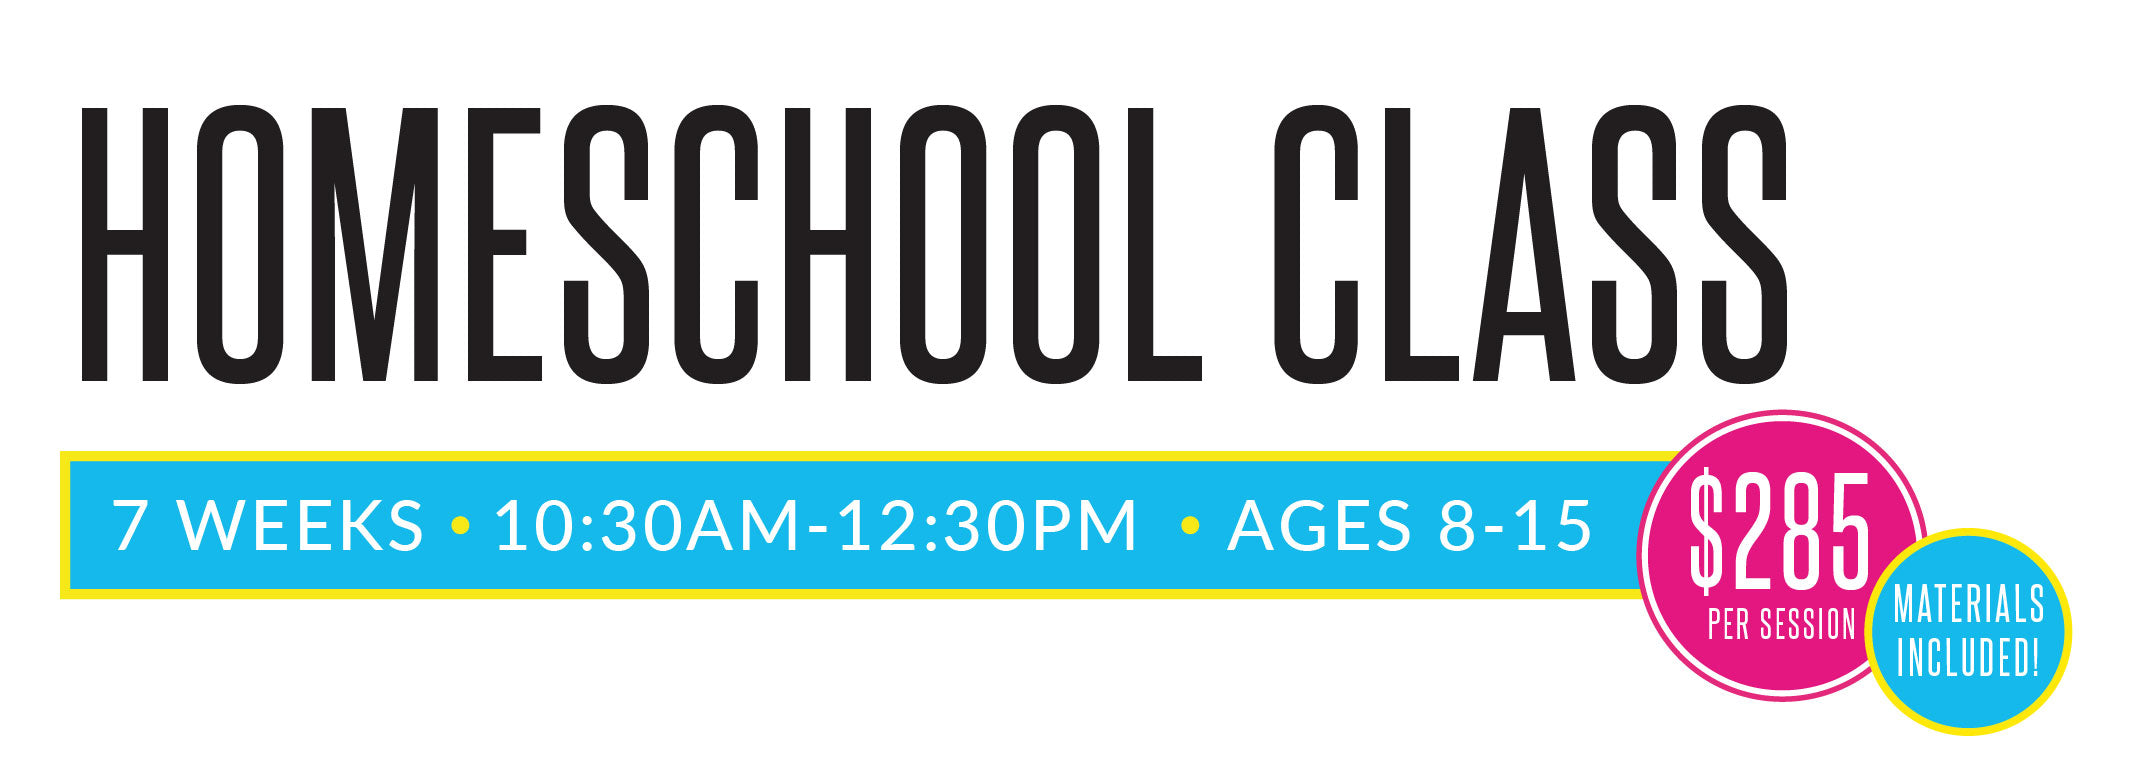 Homeschool class. 7 weeks. 10:30am-12:30pm. Ages 8-15. $285 materials included. Use your Charter funds for this class!